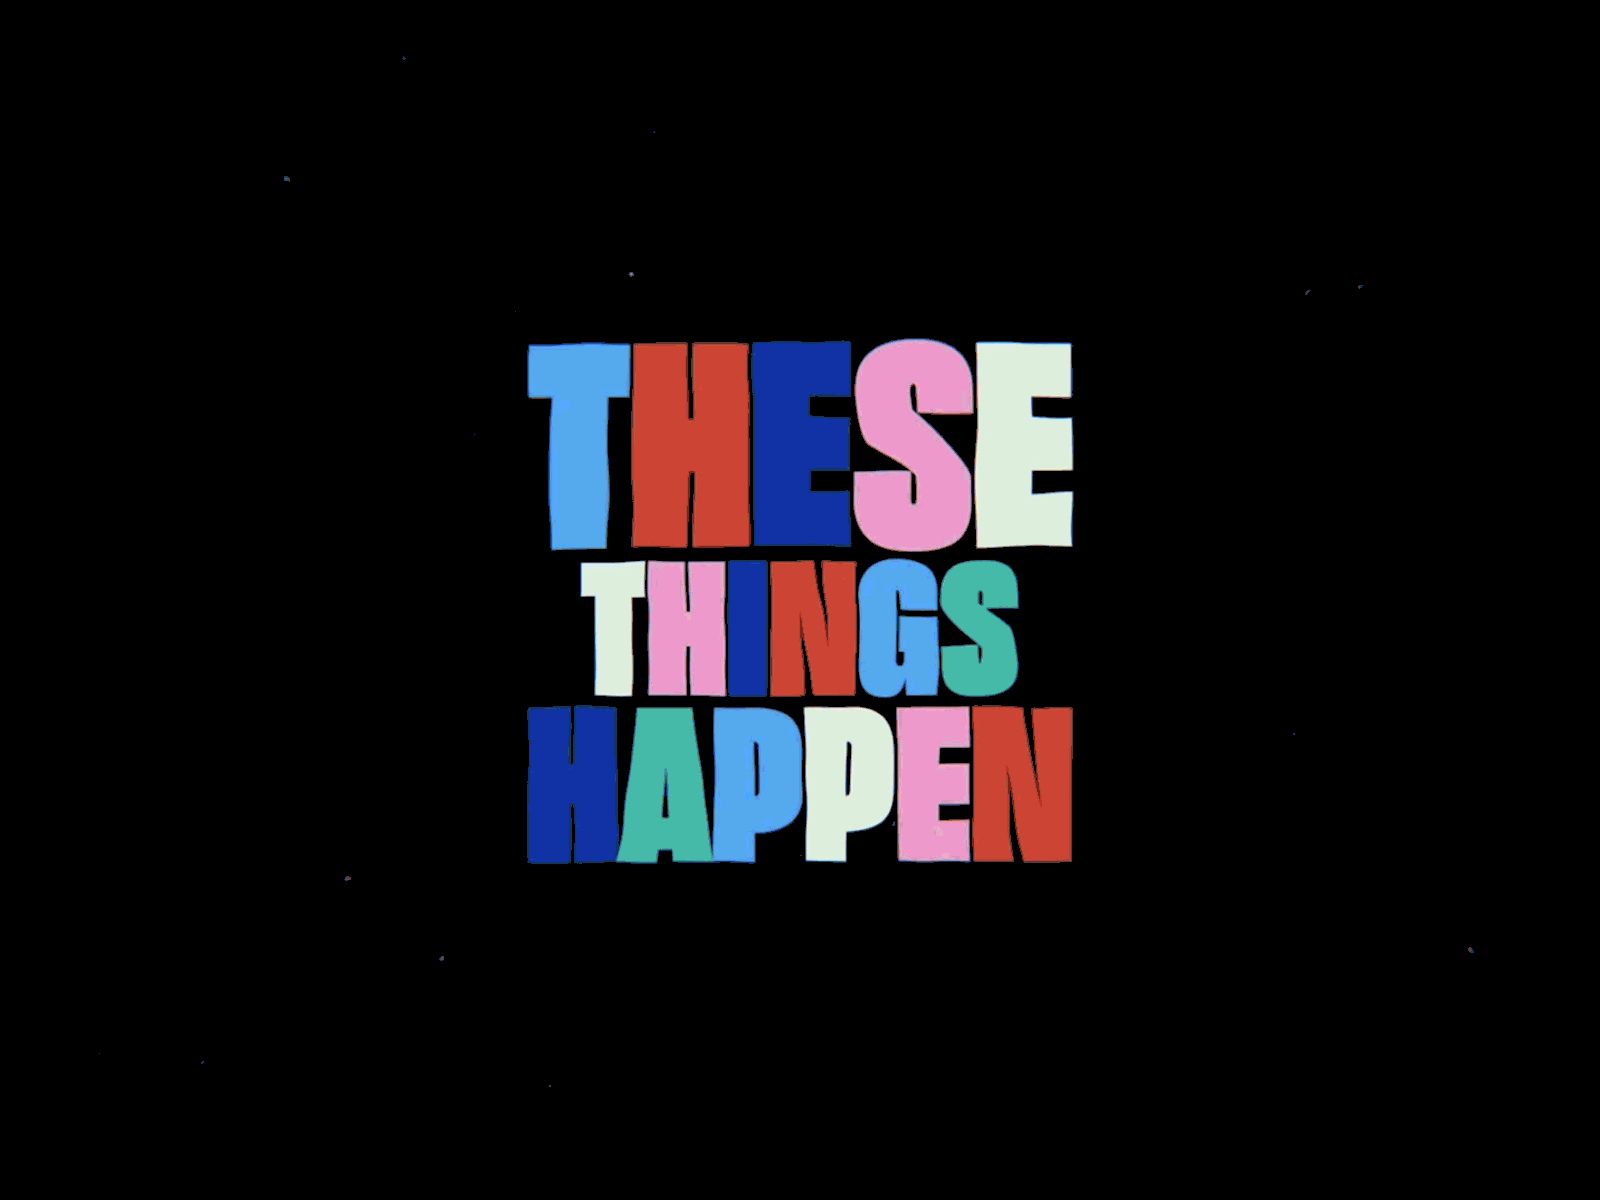 "These things happen". Expressive Kinetic Typography